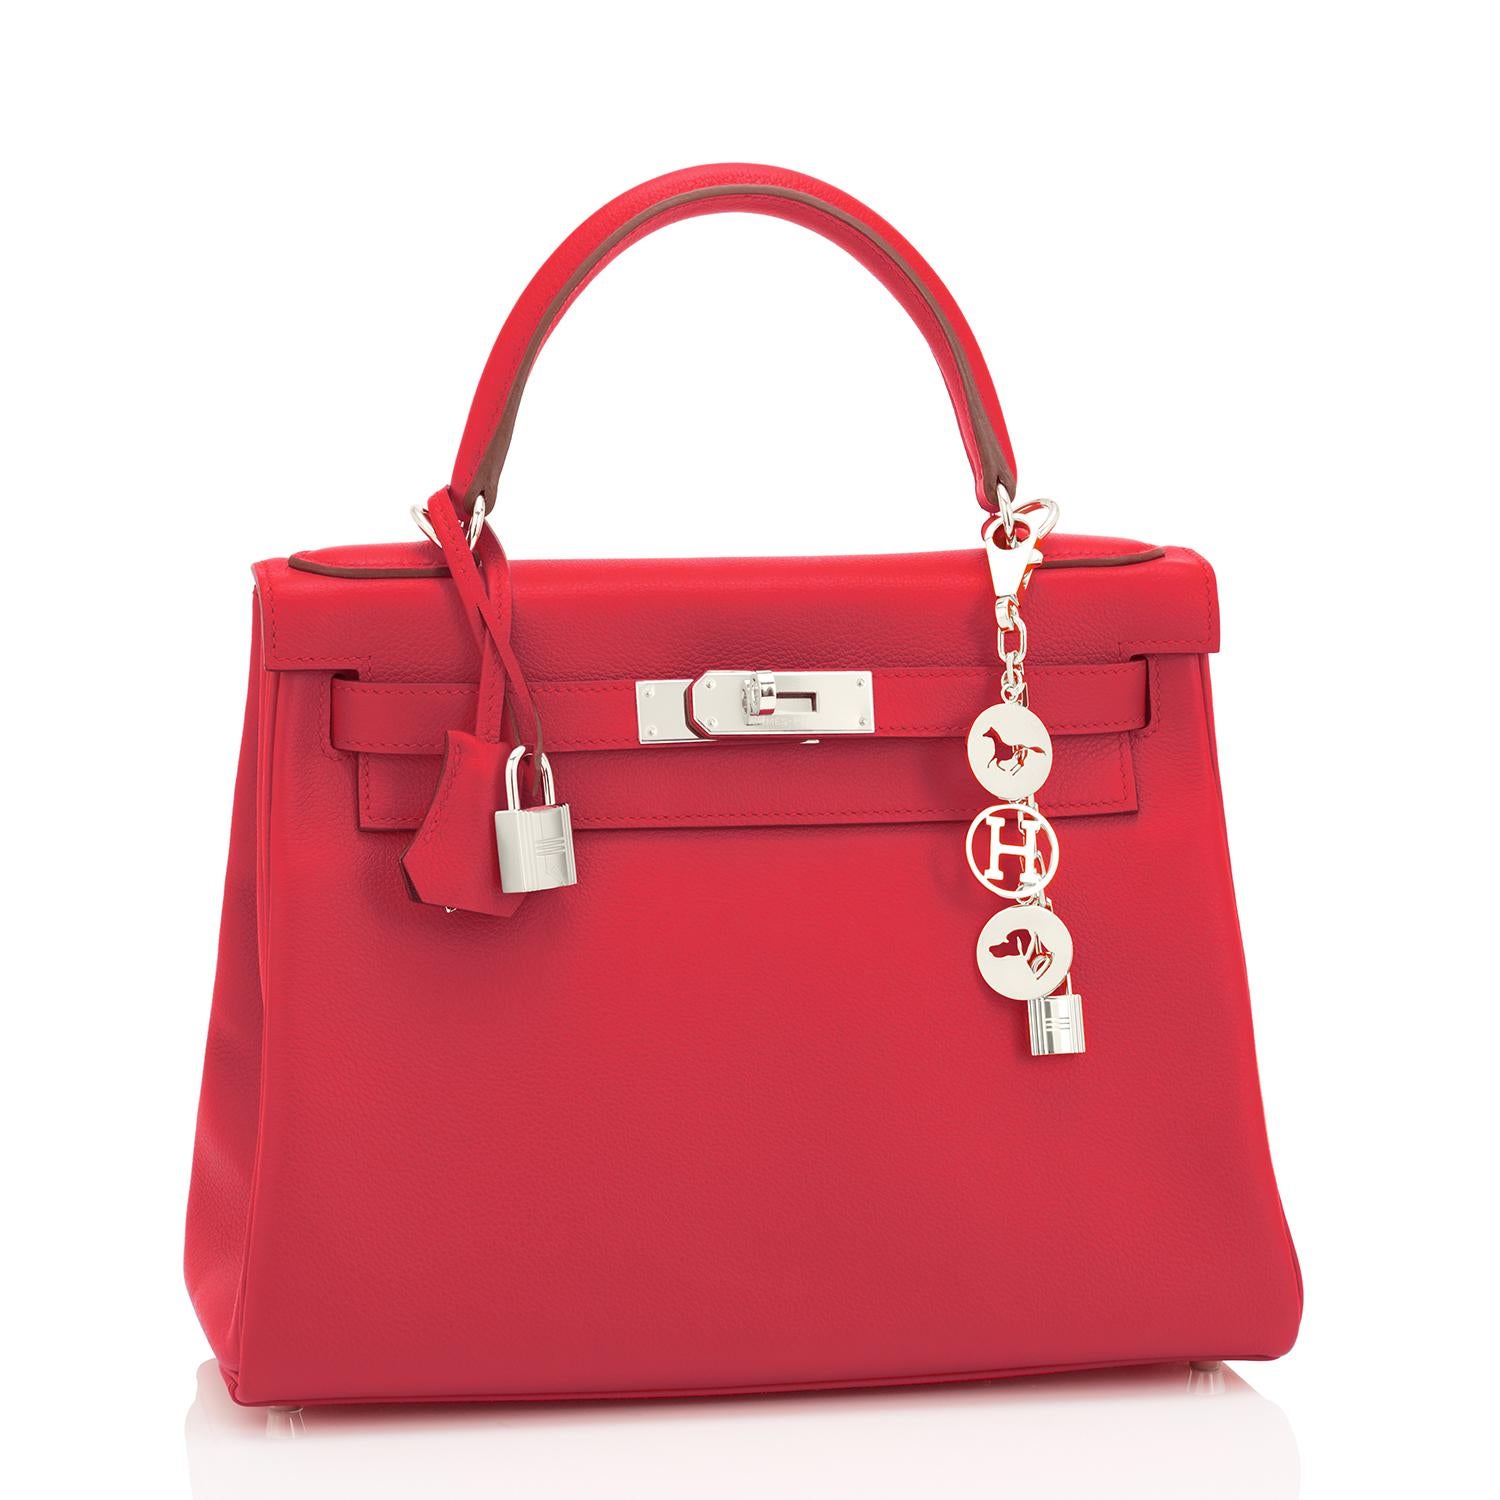 Hermes Kelly 28cm Rouge de Coeur Grenat Lipstick Red Shoulder Bag Z Stamp, 2021
Every woman needs a sexy red Kelly!
Perfect gift! Comes with shoulder strap, keys, lock, clochette, sleepers, rain protector, and orange Hermes box. 
Just purchased from